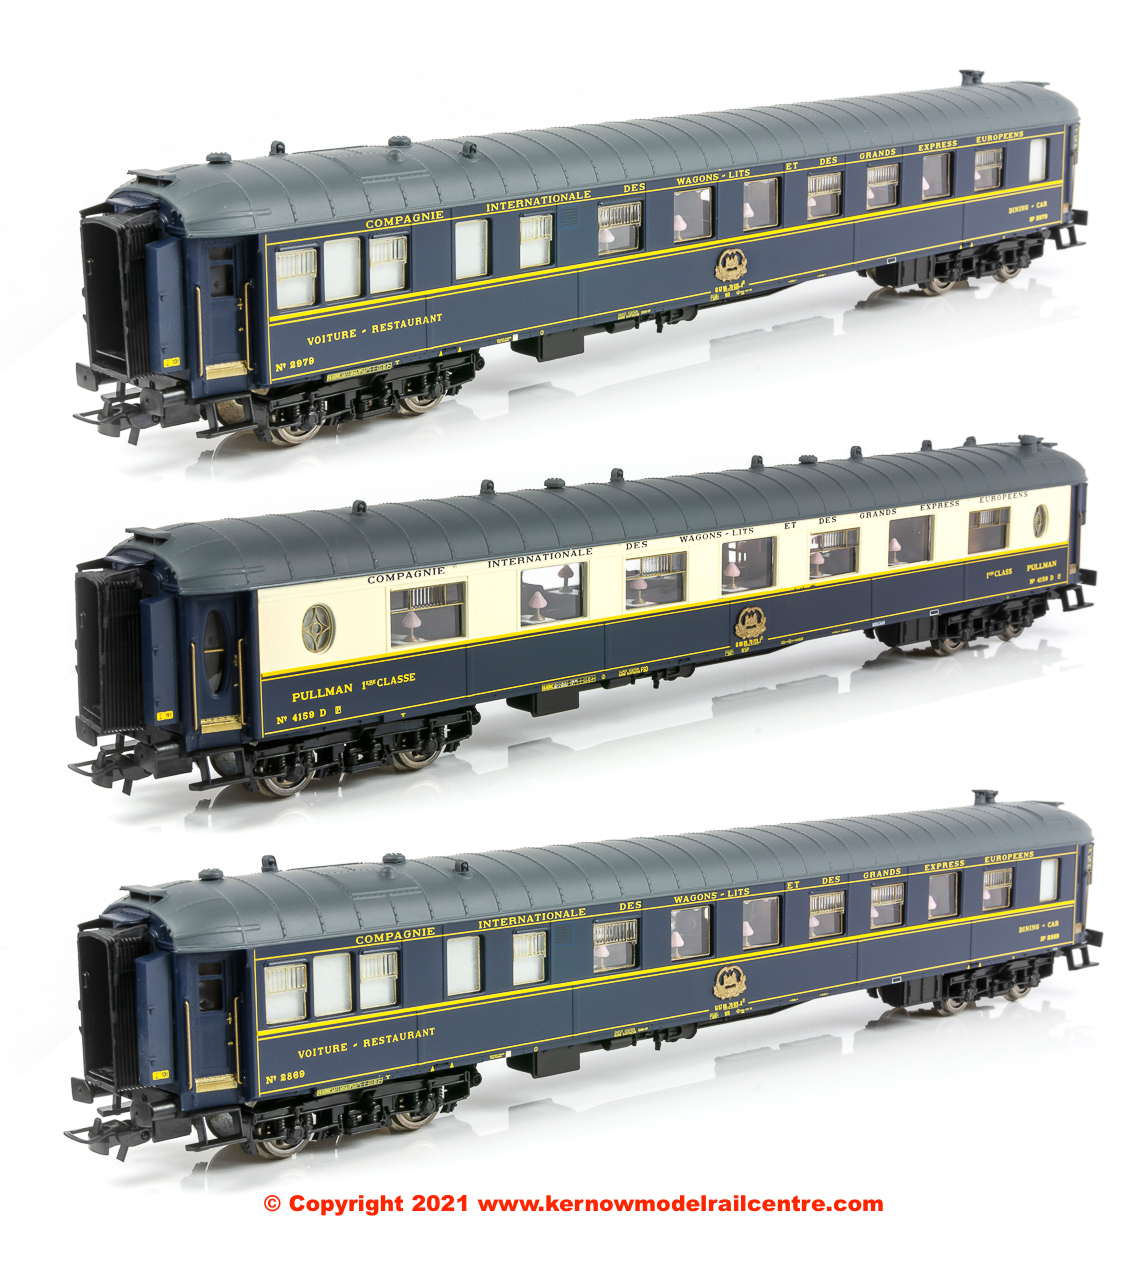 HJ4156 Jouef CIWL, 3-unit set of coaches, including 1 x "Riviera" coach number 2979, 1 x "Anatolie" coach number 2869 and 1 x "Flèche d'Or" coach number 4159, period V-VI